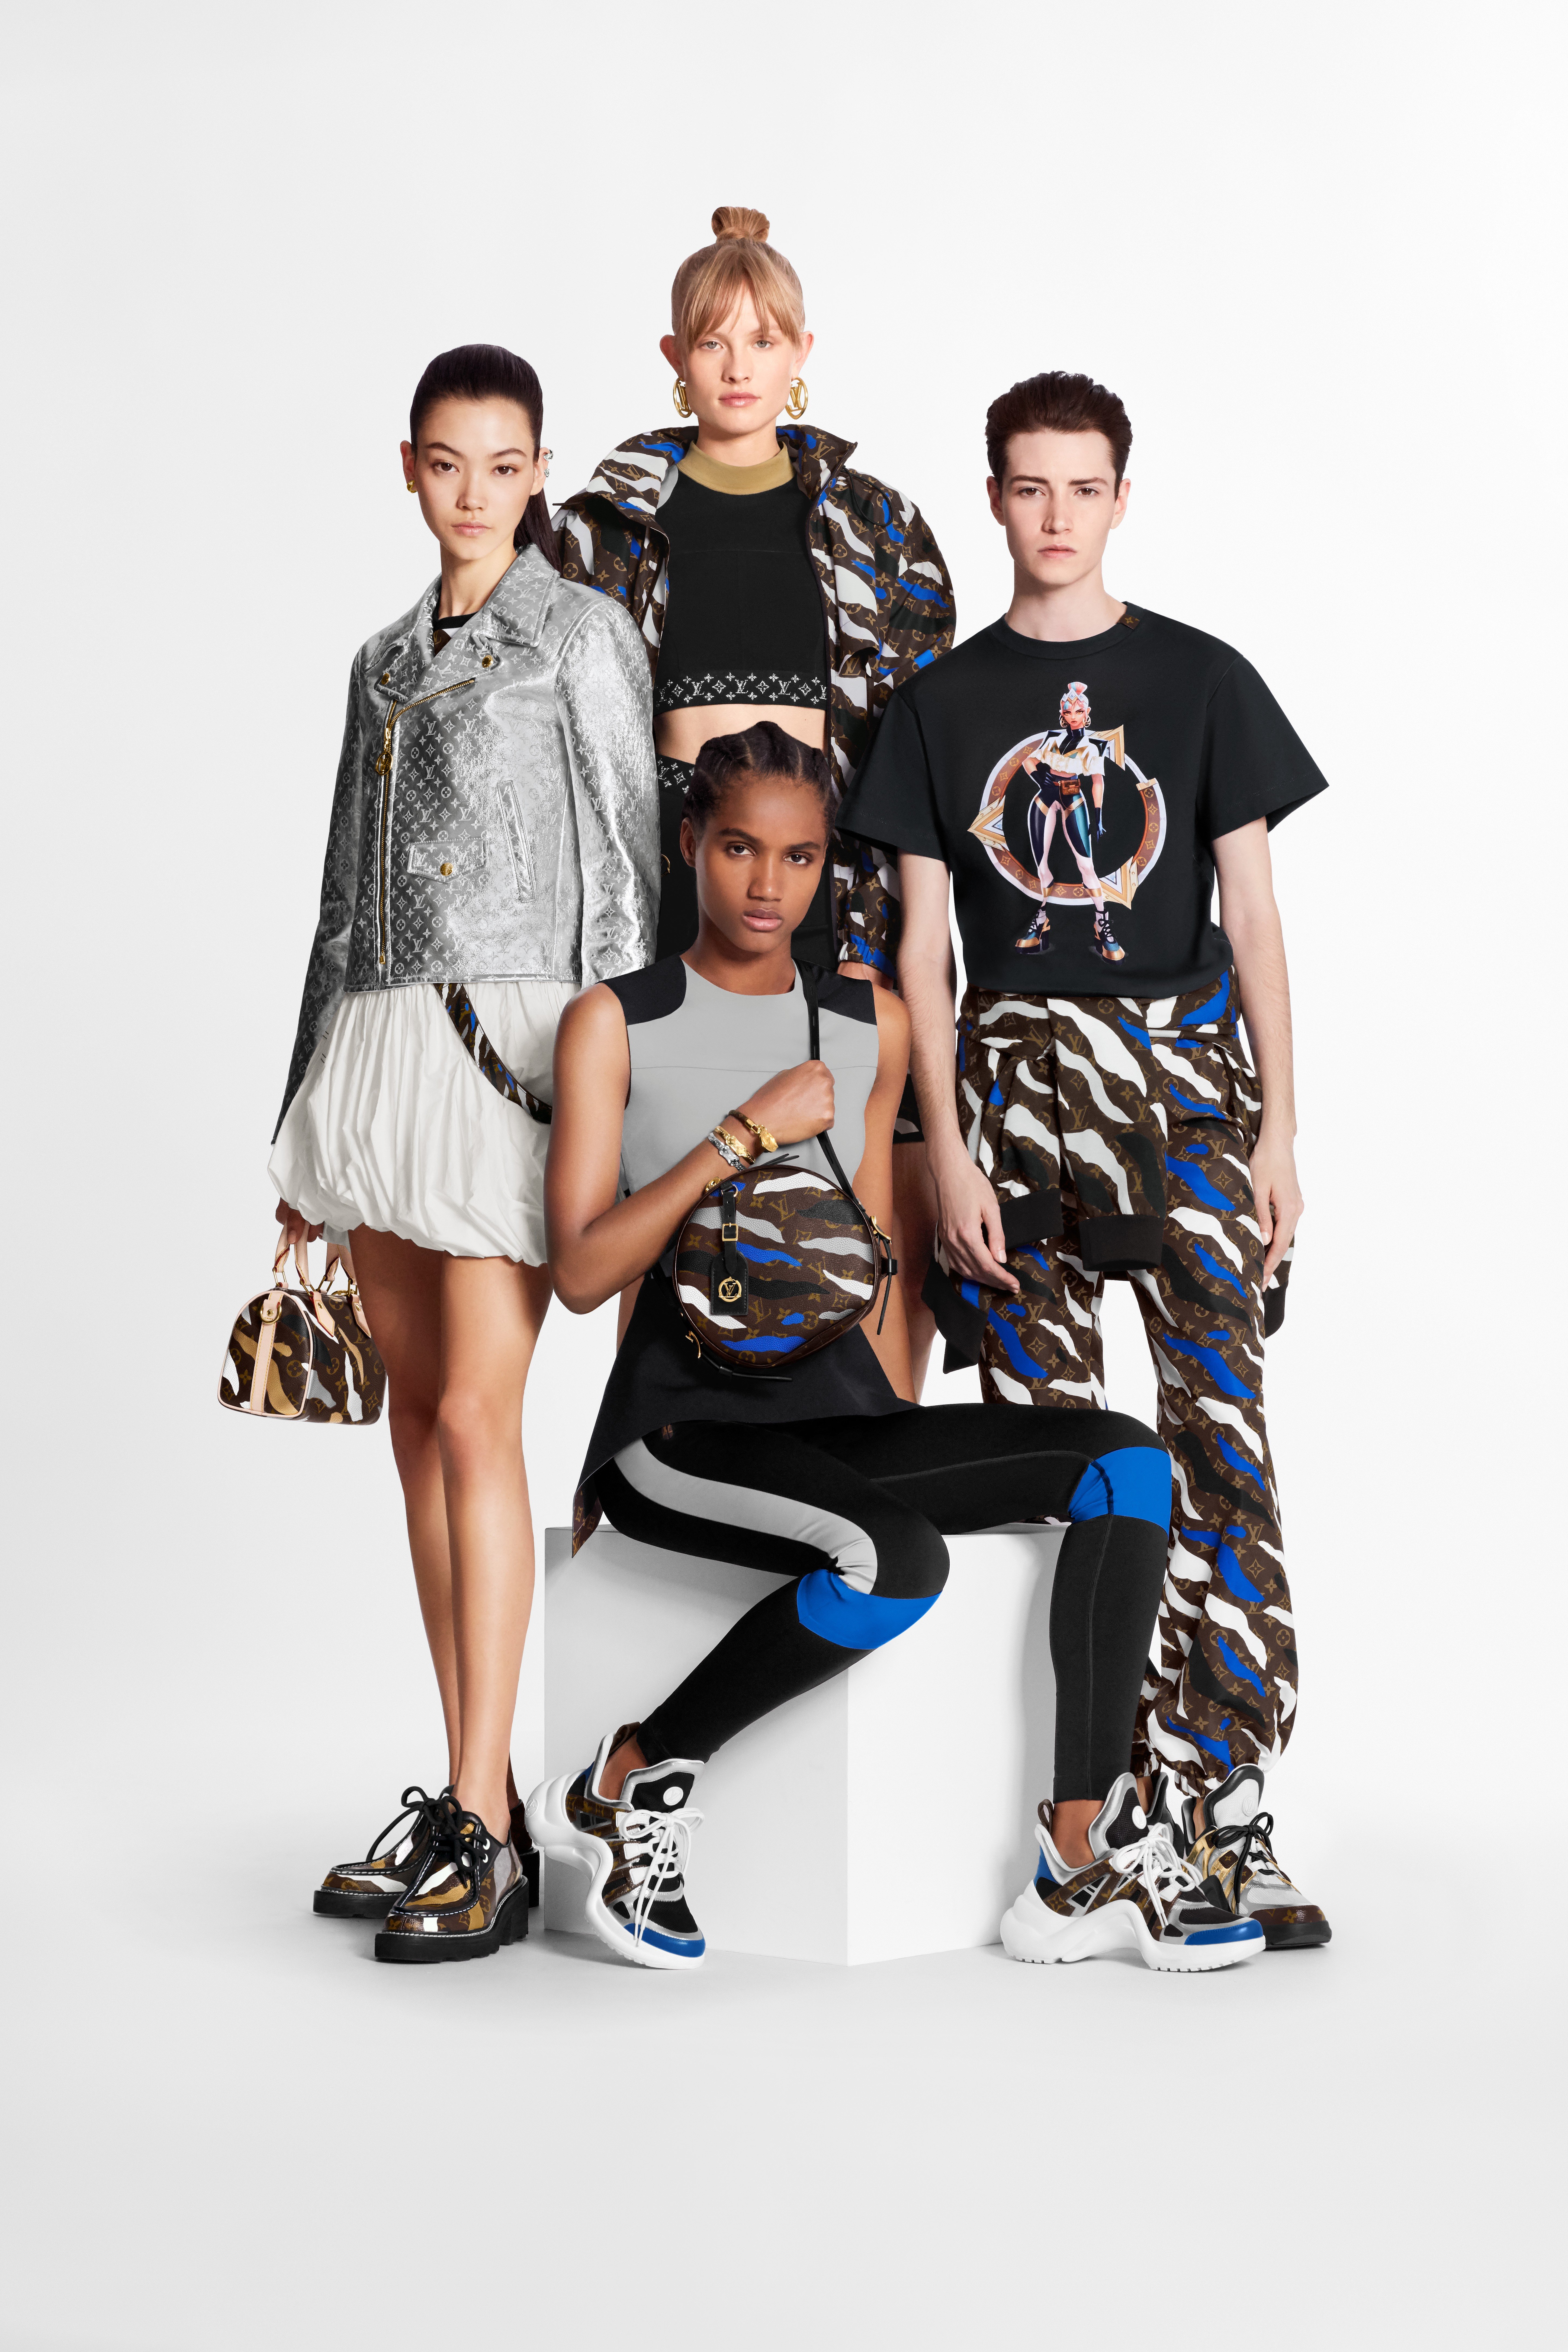 Real-life looks designed by Louis Vuitton and inspired by League of Legends. Photo: Handout